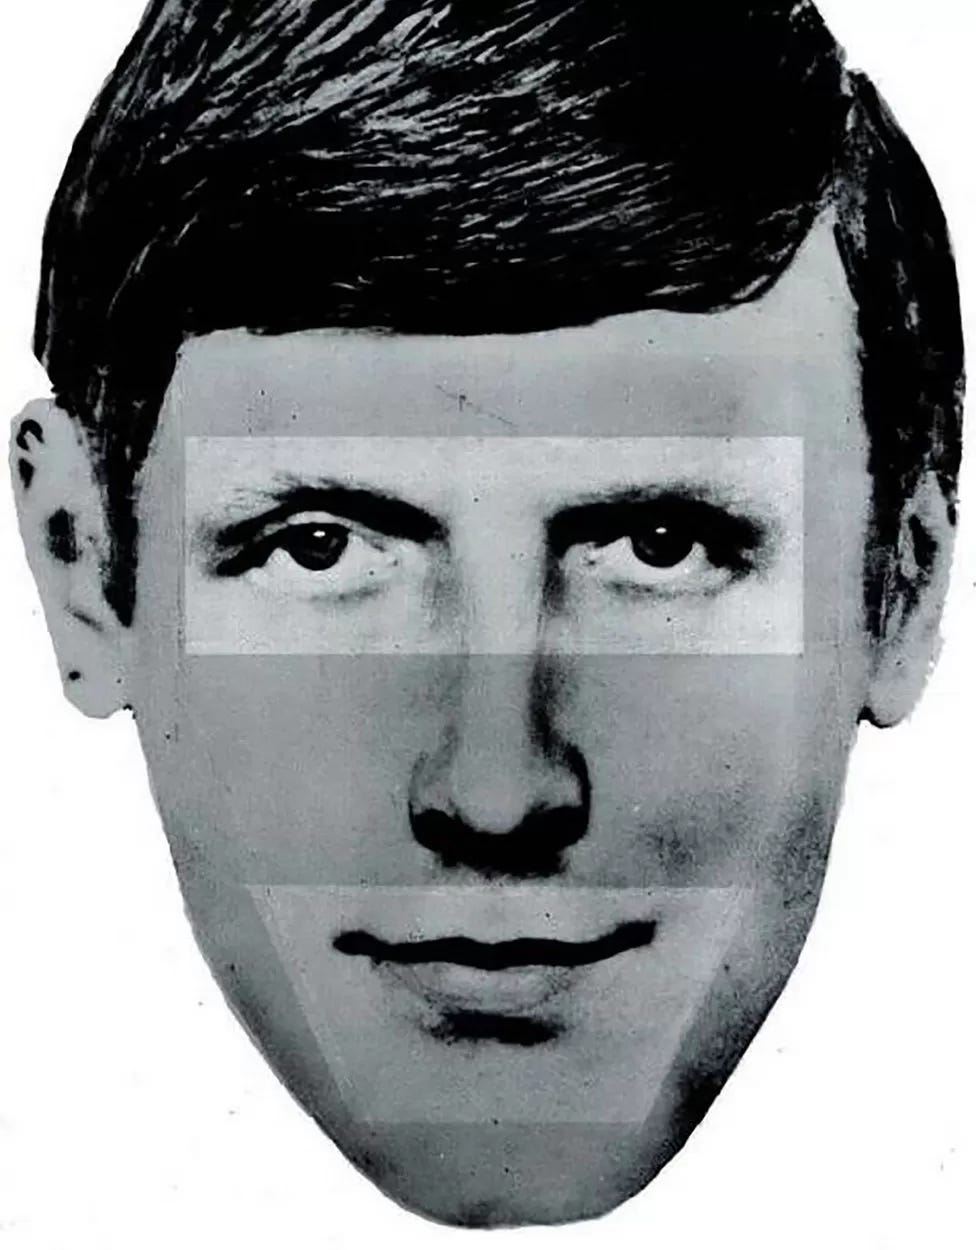 An image released by police on what Bible John Might Look Like